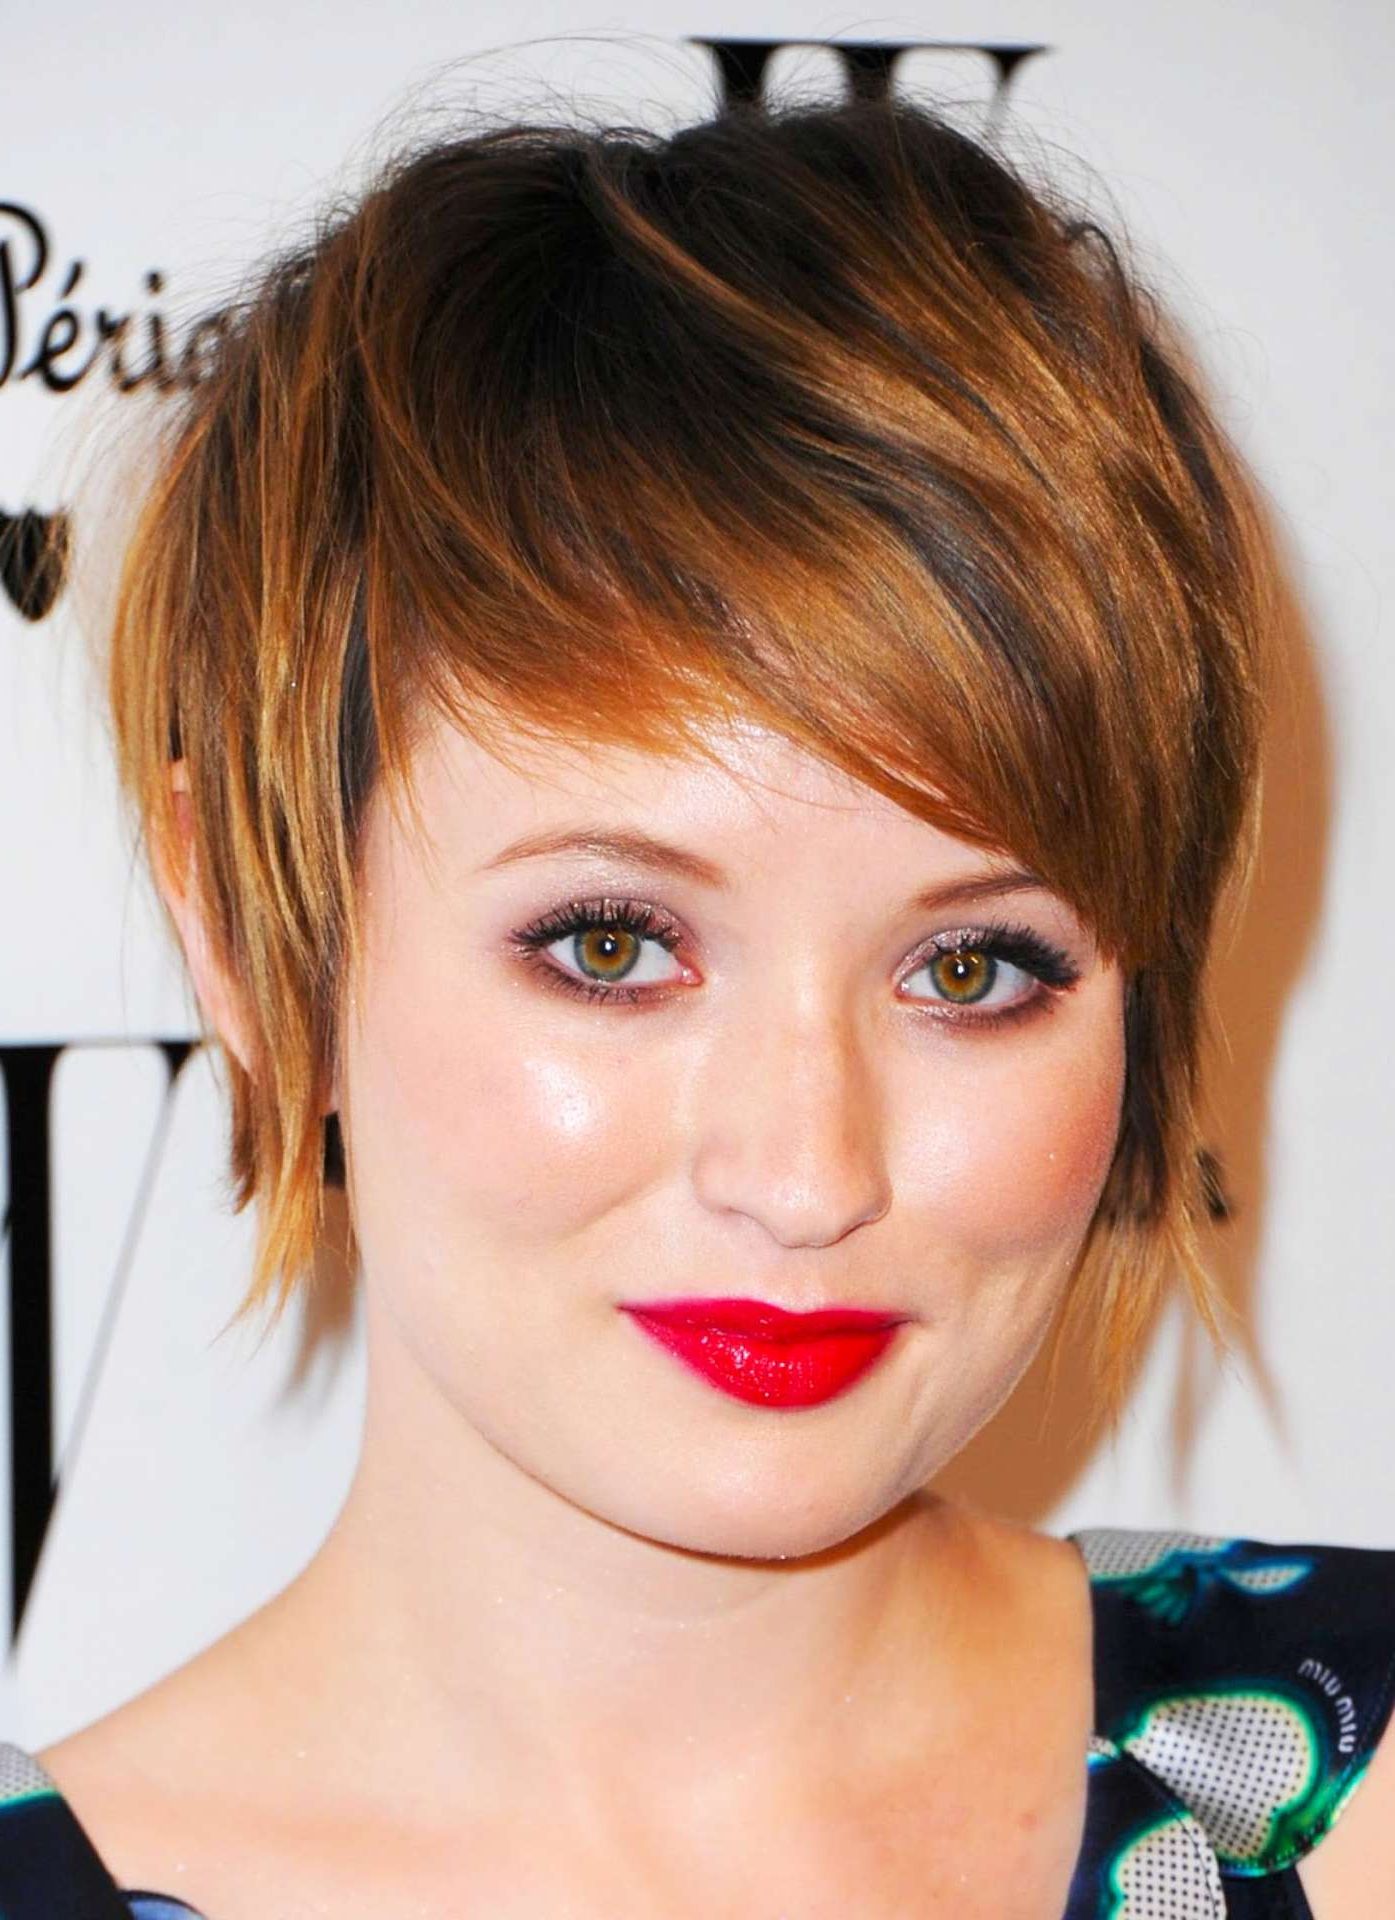 14 Best Short Haircuts For Women With Round Faces Regarding Short Haircuts For Round Chubby Faces (View 5 of 25)